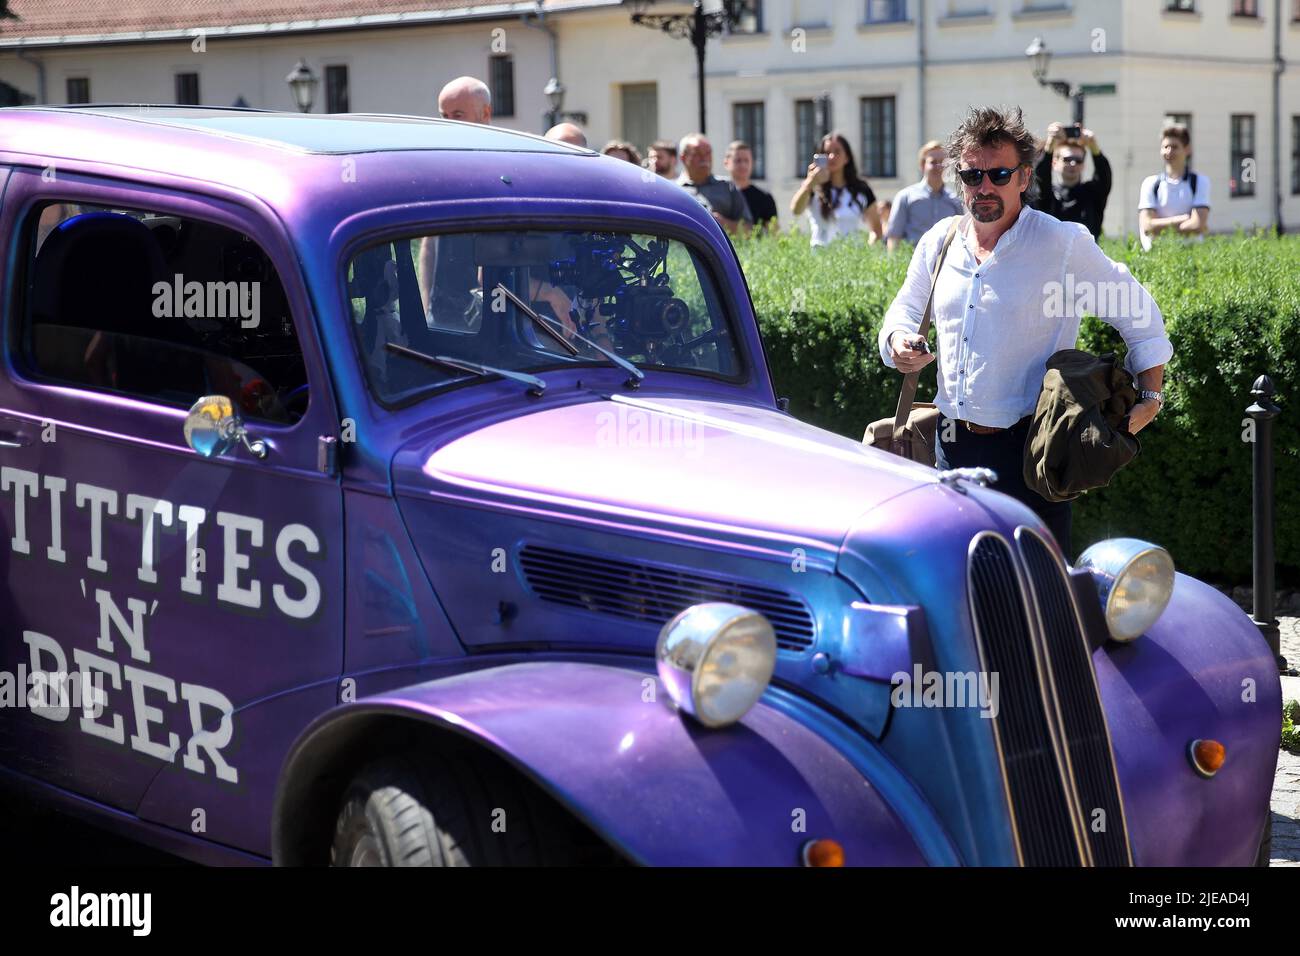 The Grand Tour star, Richard Hammond, looks at a purple vintage car in Cracow, while on tour filming the show in Poland. The Grand Tour is a British motoring television series, created by Jeremy Clarkson, Richard Hammond, James May, and Andy Wilman, made for Amazon exclusively for its online streaming service Amazon Prime Video which premiered in 2016. The programme was conceived in the wake of the departure of Clarkson, Hammond, May and Wilman from the BBC series Top Gear. (Photo by Vito Corleone / SOPA Images/Sipa USA) Stock Photo